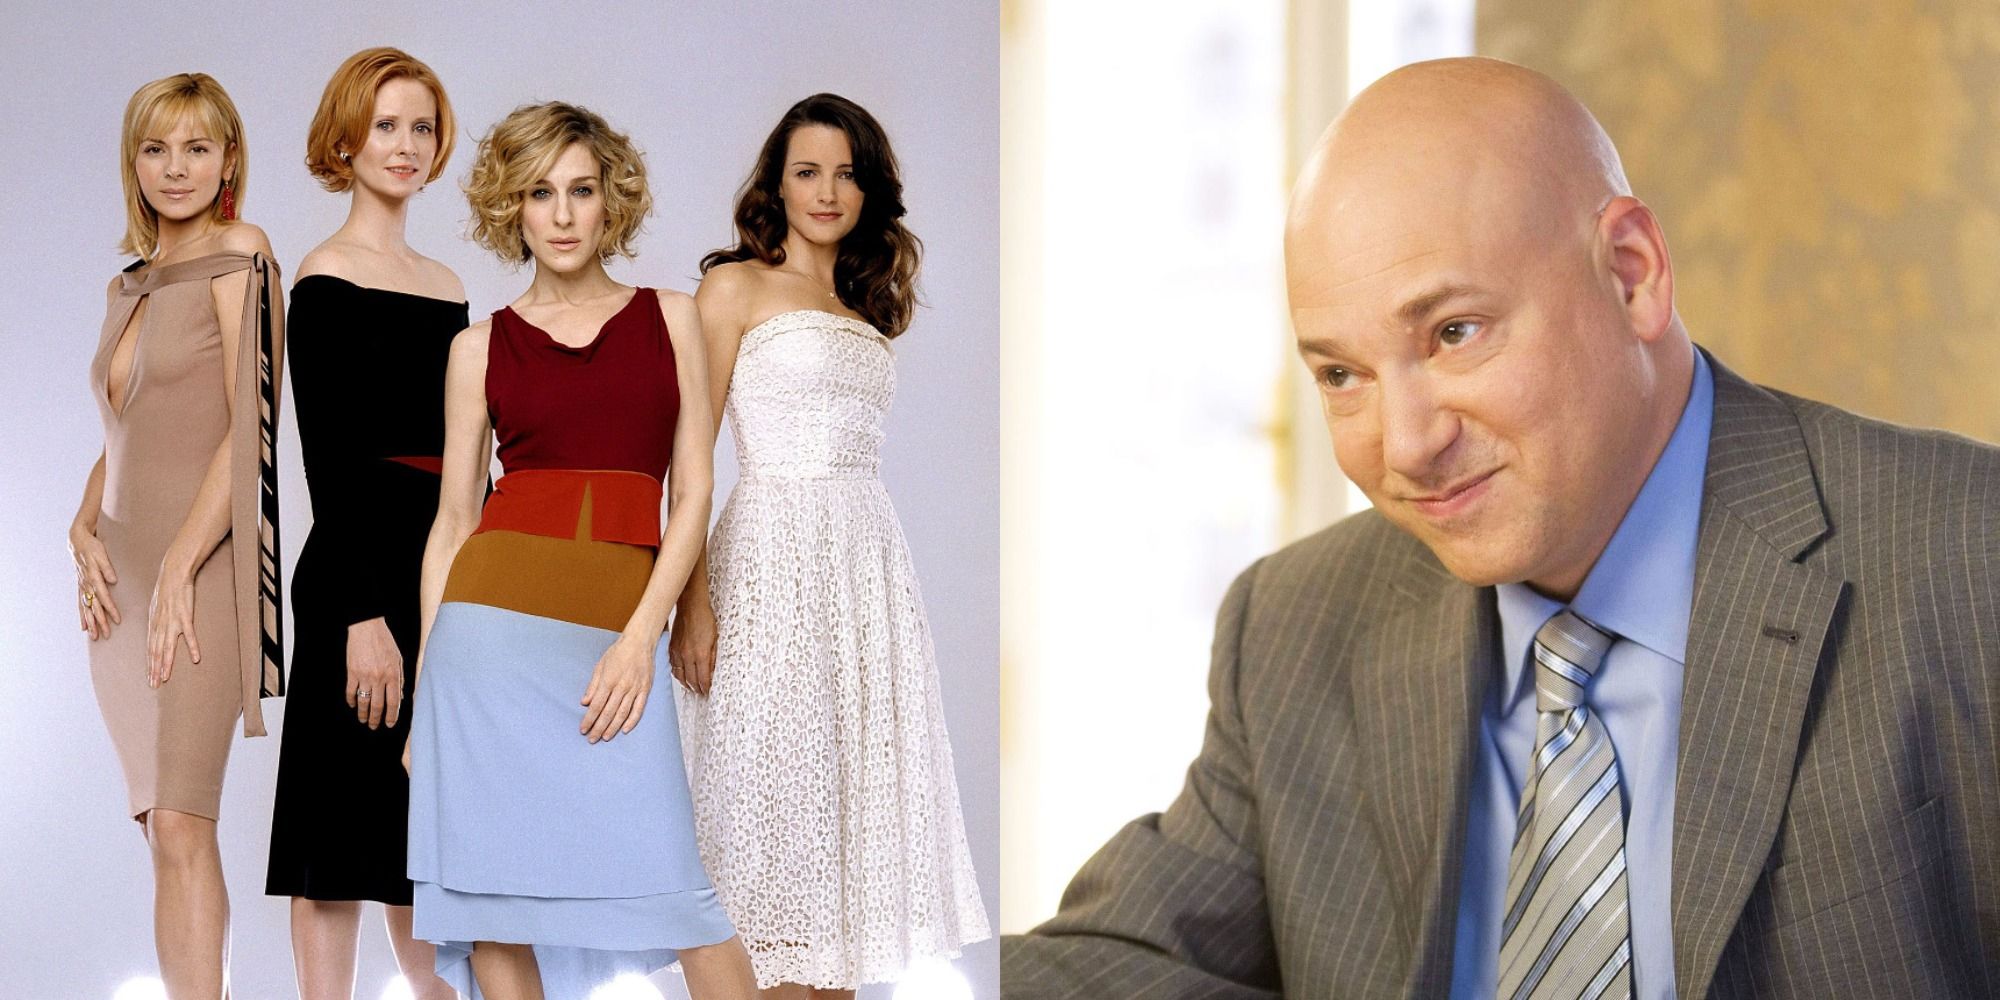 Split image showing the four main girls and Harry from Sex and the City